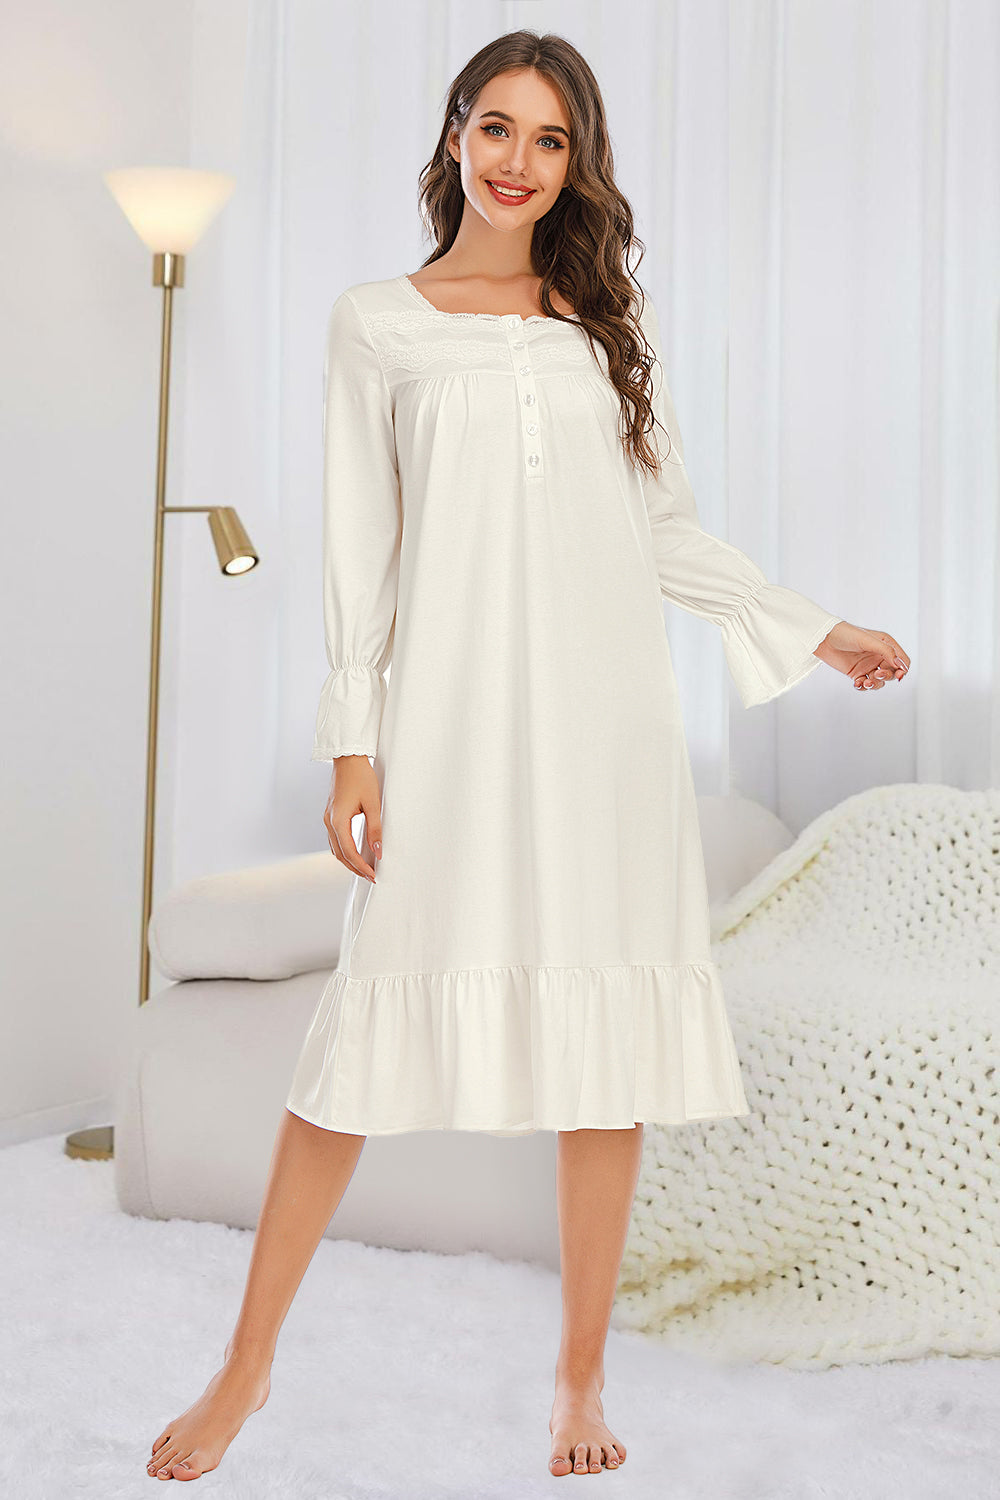 Flounce Sleeve Ruffle Hem Night Dress - Tophatter Deals and Online Shopping - Electronics, Jewelry, Beauty, Health, Gadgets, Fashion - Tophatter's Discounts & Offers - tophatters - tophatters.co